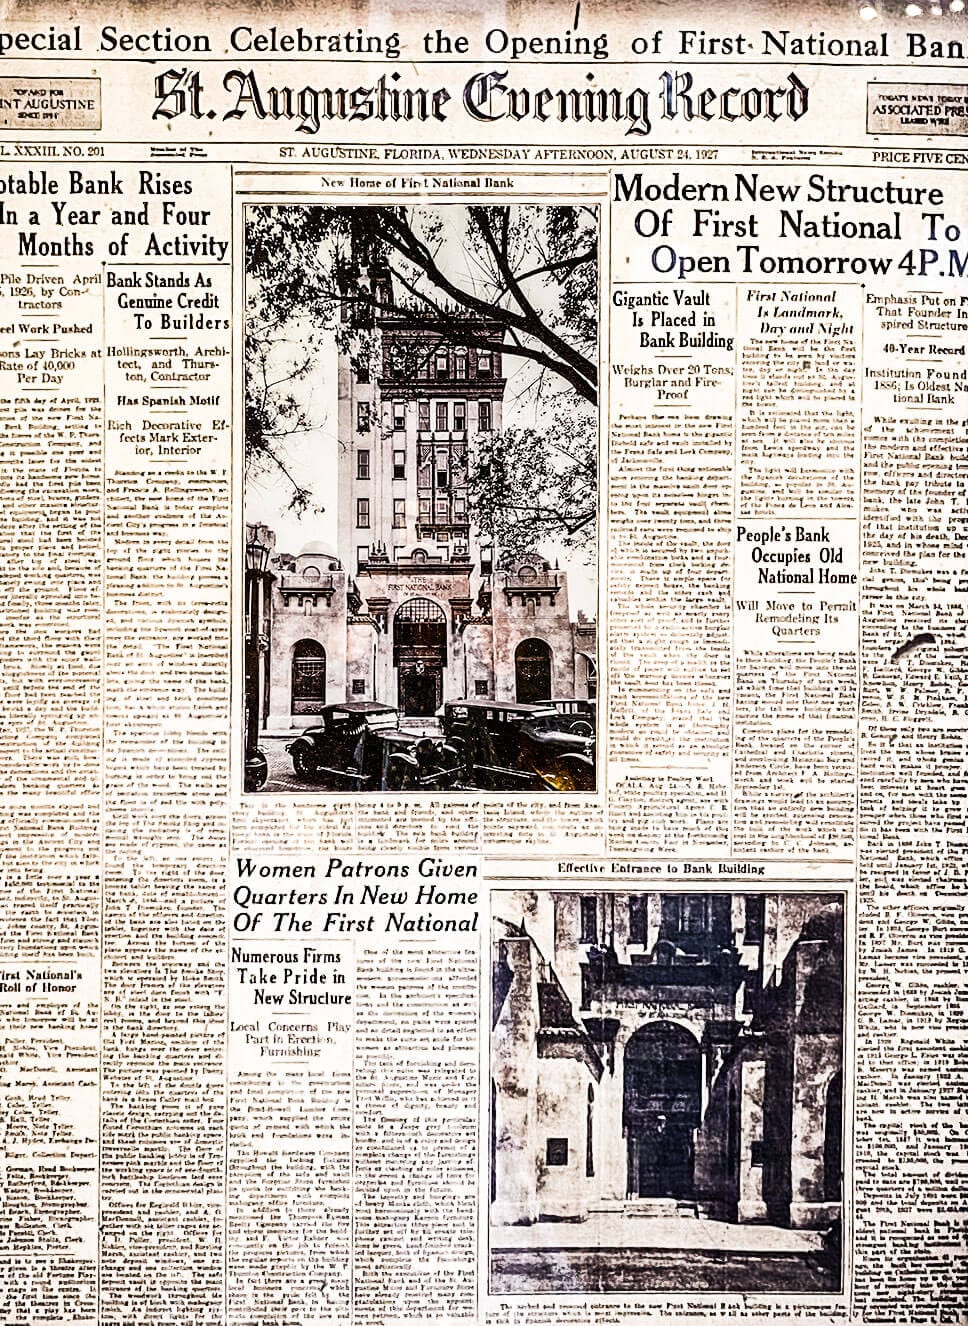 First National Bank Building Opening St. Augustine | Treasury on the Plaza History